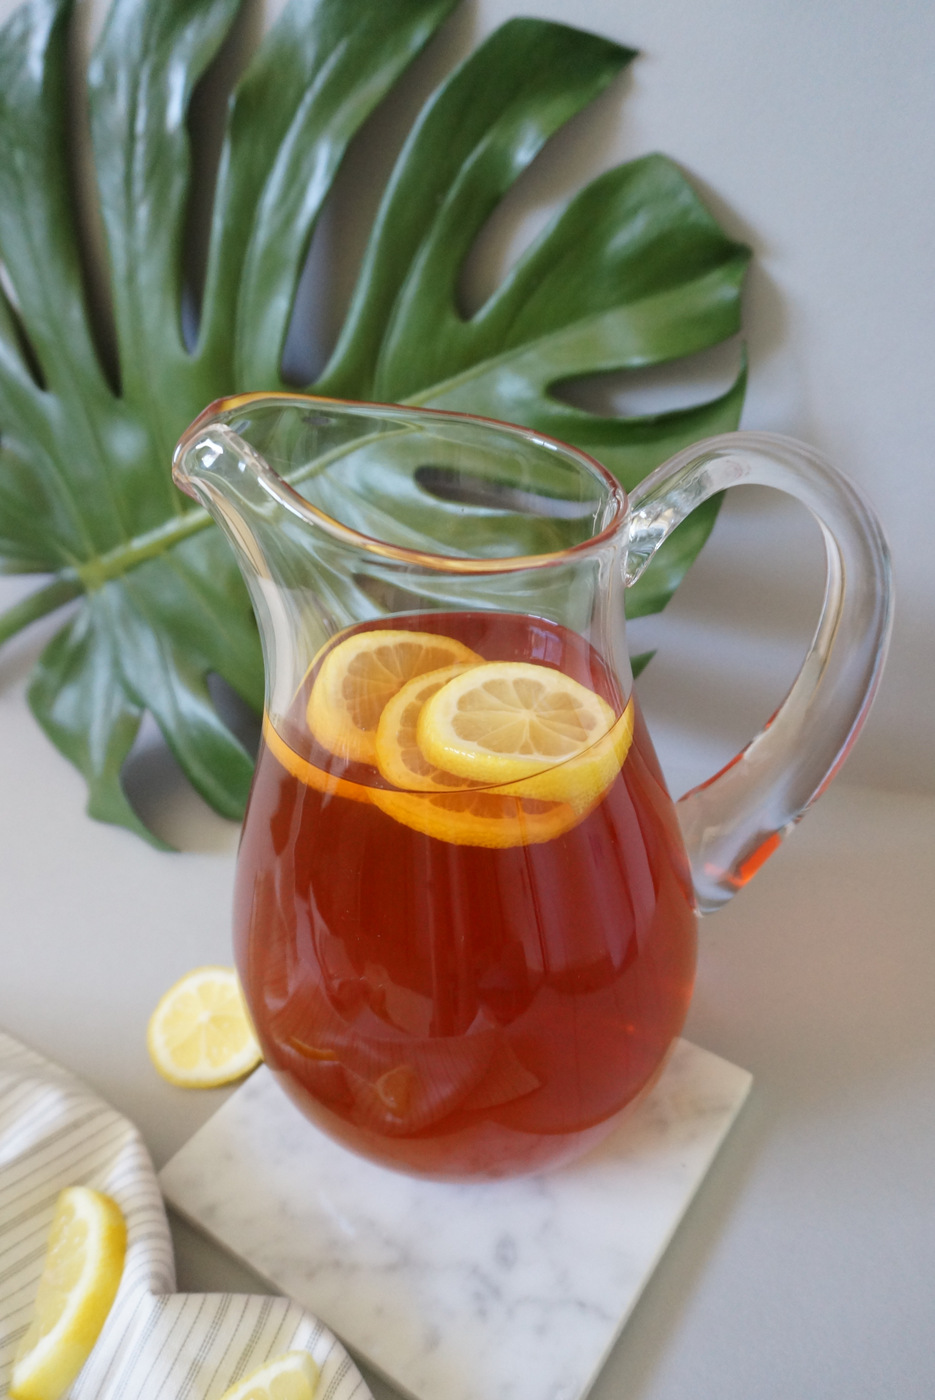 Iced tea in a glass pitcher